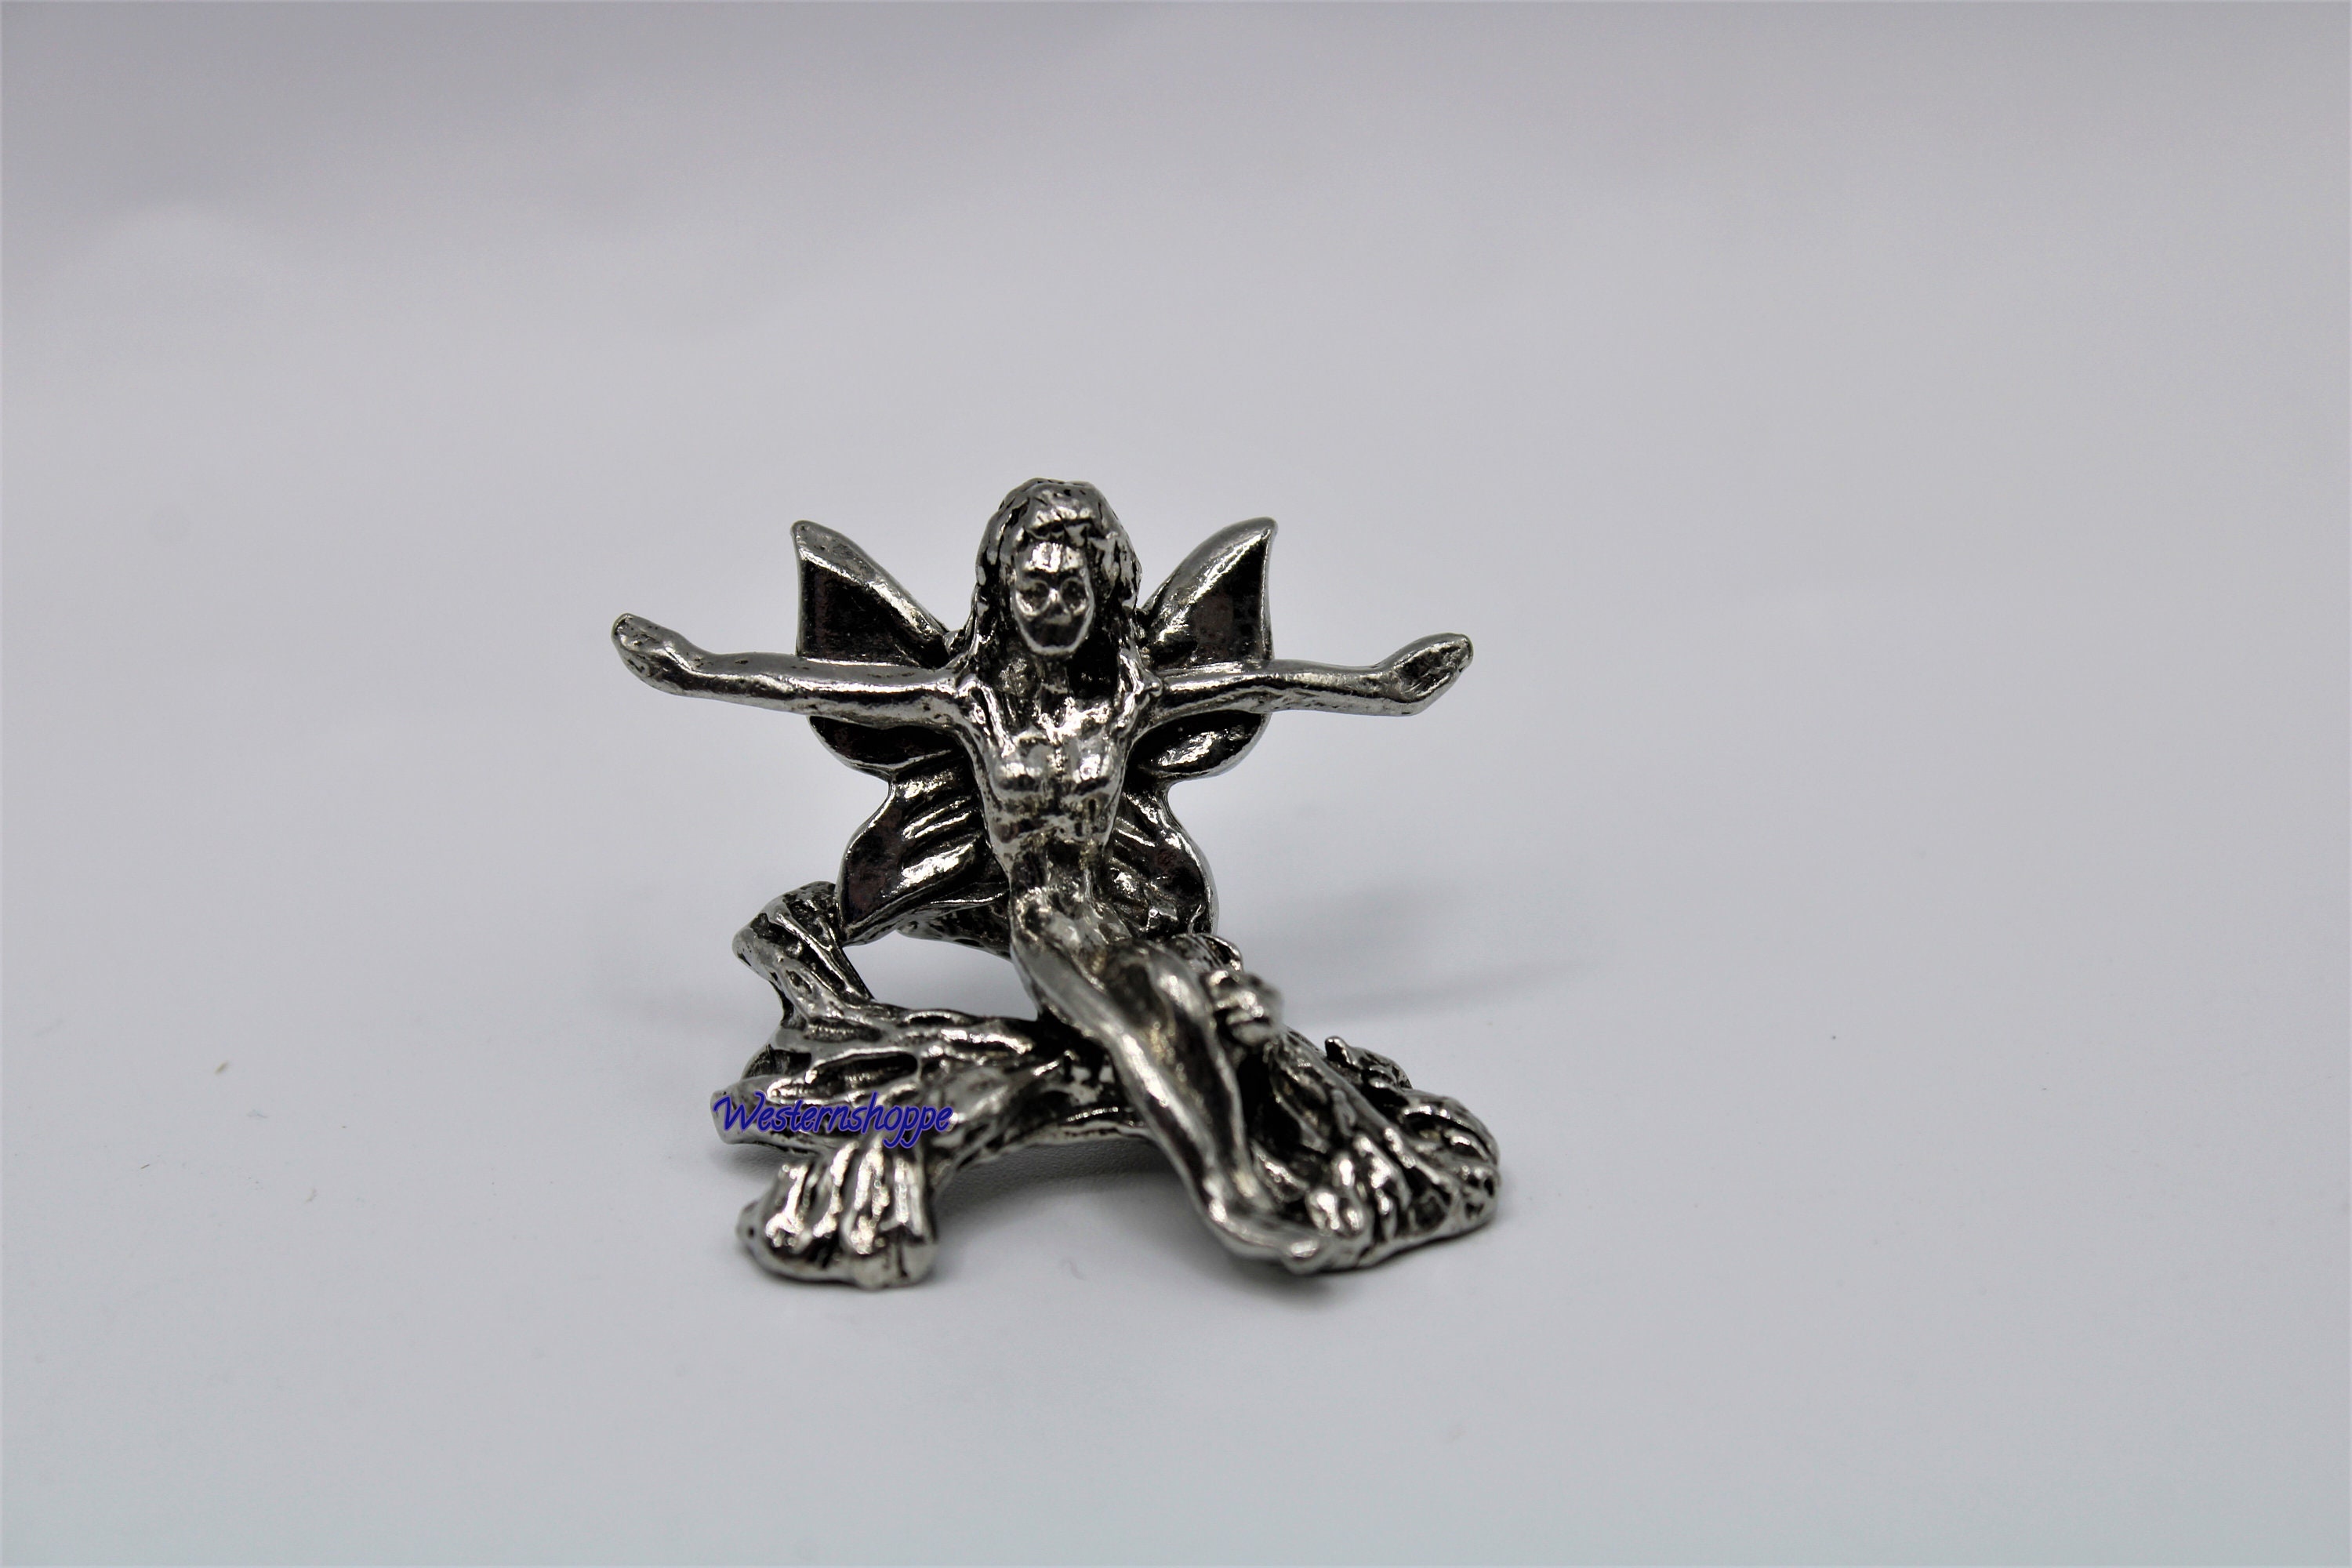 Crystal Key Pendant - Red [BB2.04FFP016] - $15.00 : The Pewter Dragon, Fine  Fantasy Pewter Figurines